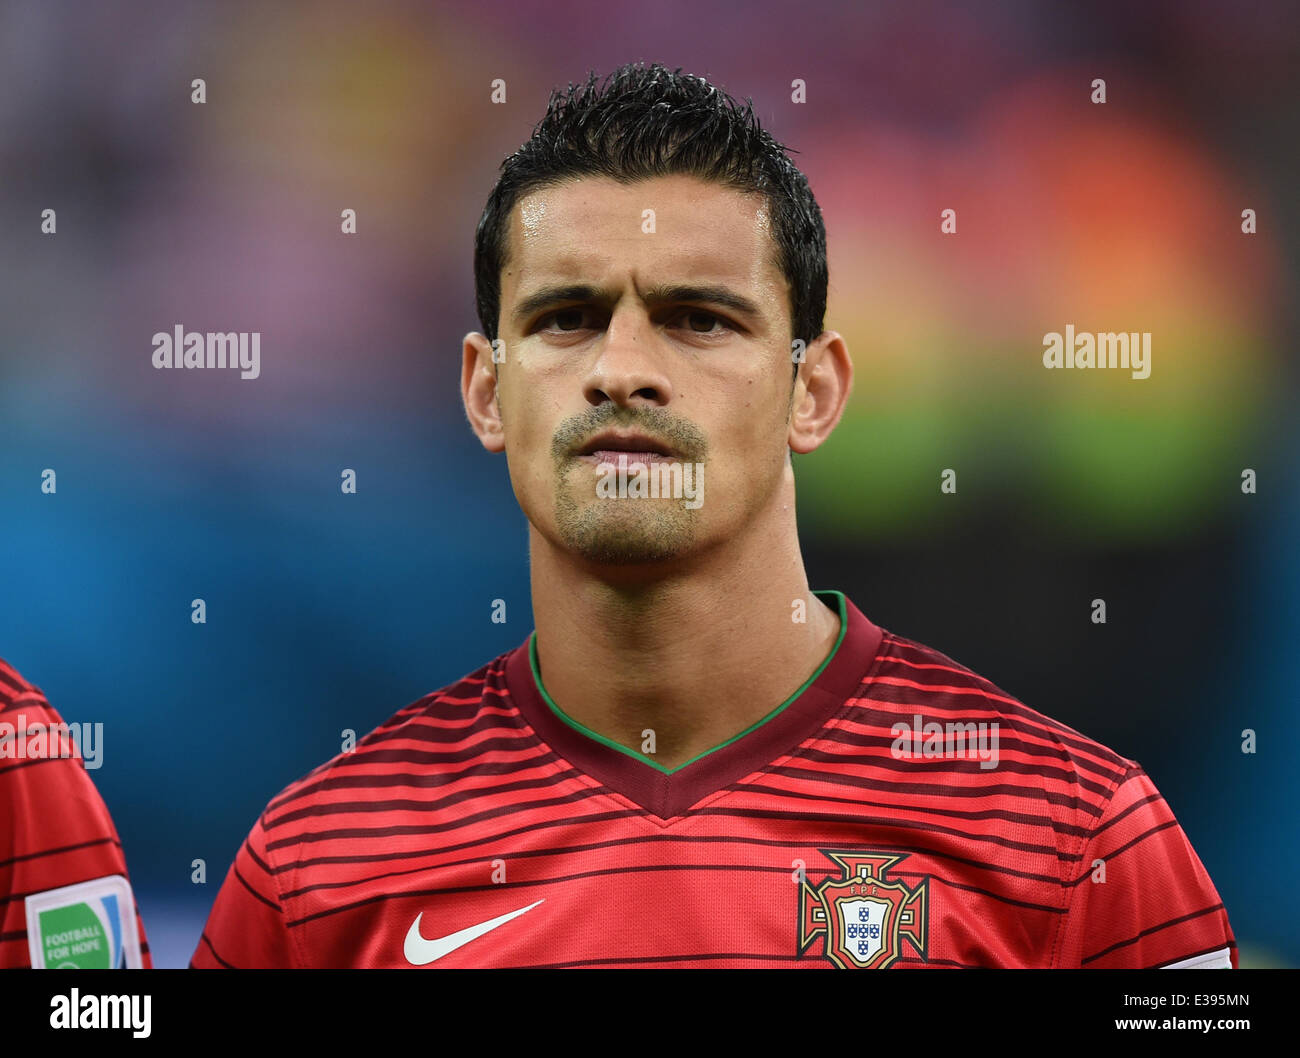 Manaus, Brazil. 22nd June, 2014. Ricardo Costa of Portugal seen during the national anthem prior to the FIFA World Cup 2014 group G preliminary round match between the USA and Portugal at the Arena Amazonia Stadium in Manaus, Brazil, 22 June 2014. Photo: Marius Becker/dpa/Alamy Live News Stock Photo